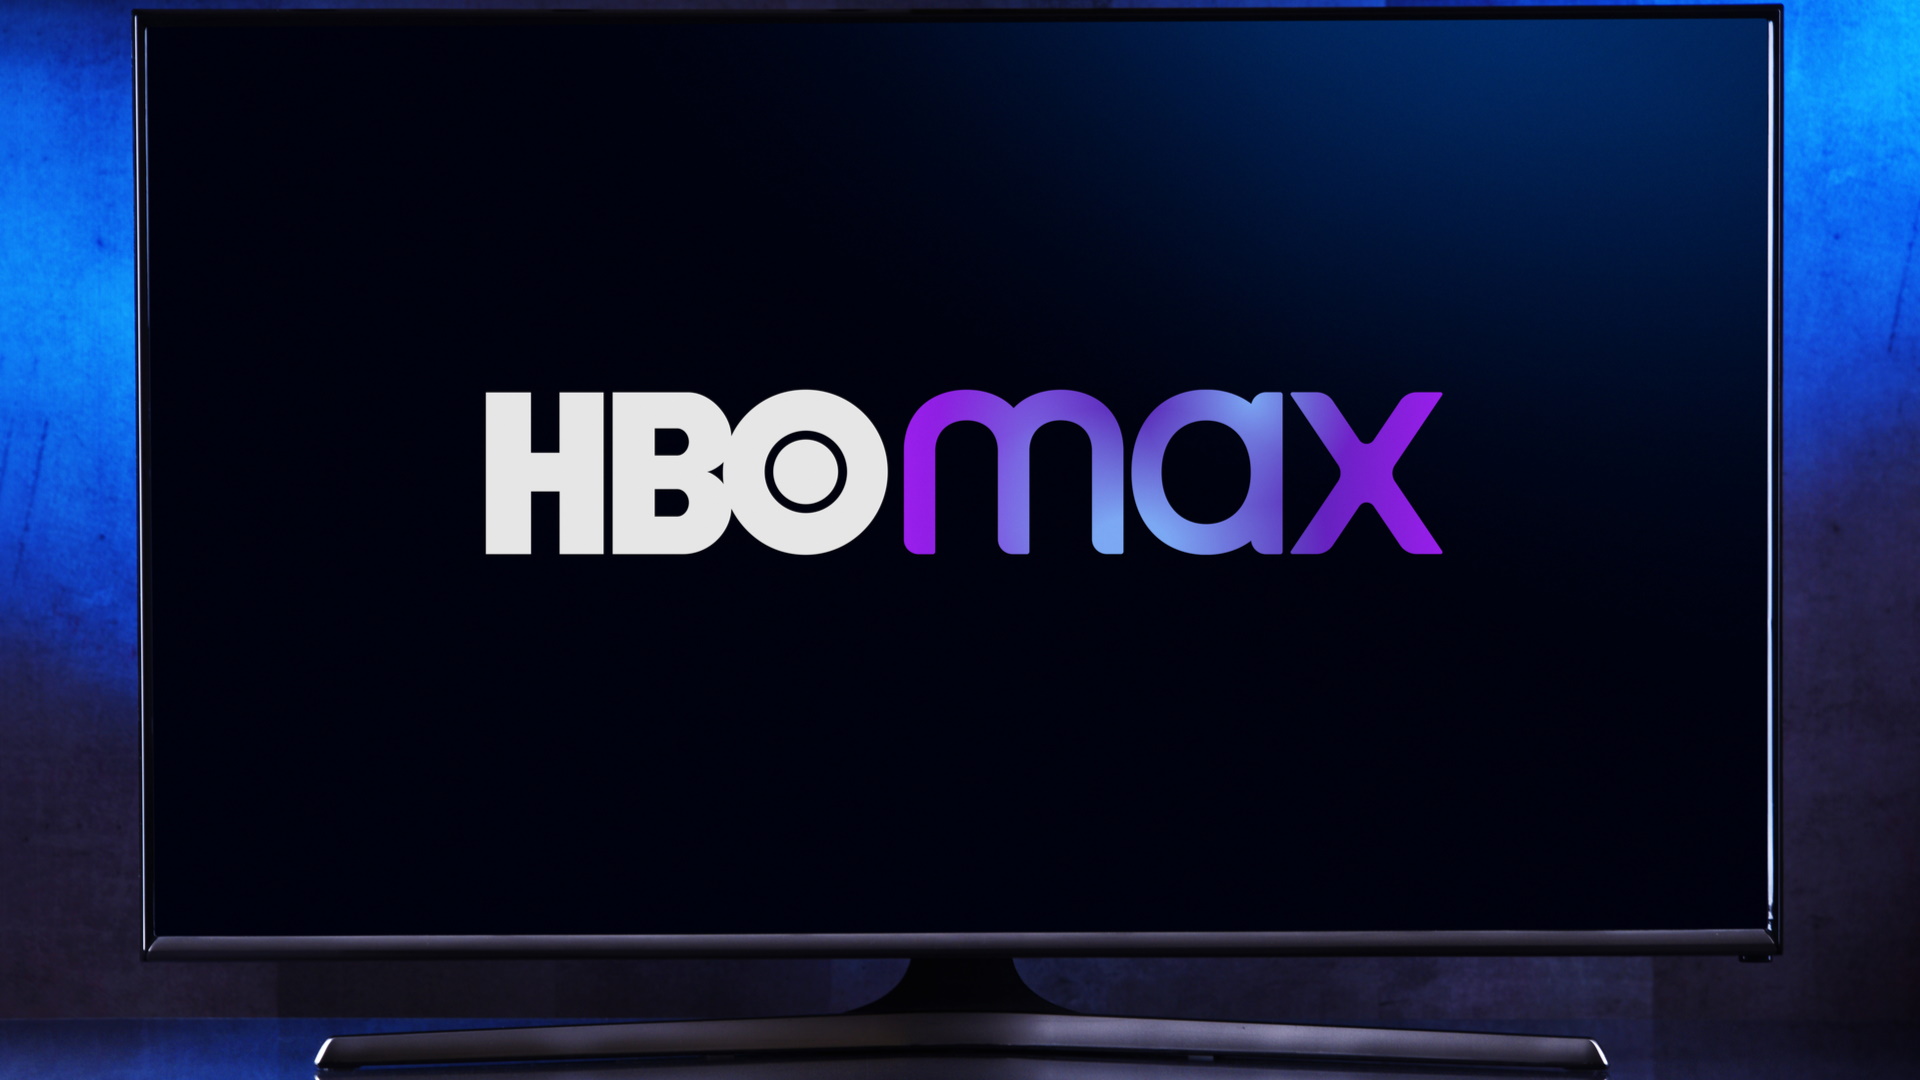 HBO Max logo on a smart TV